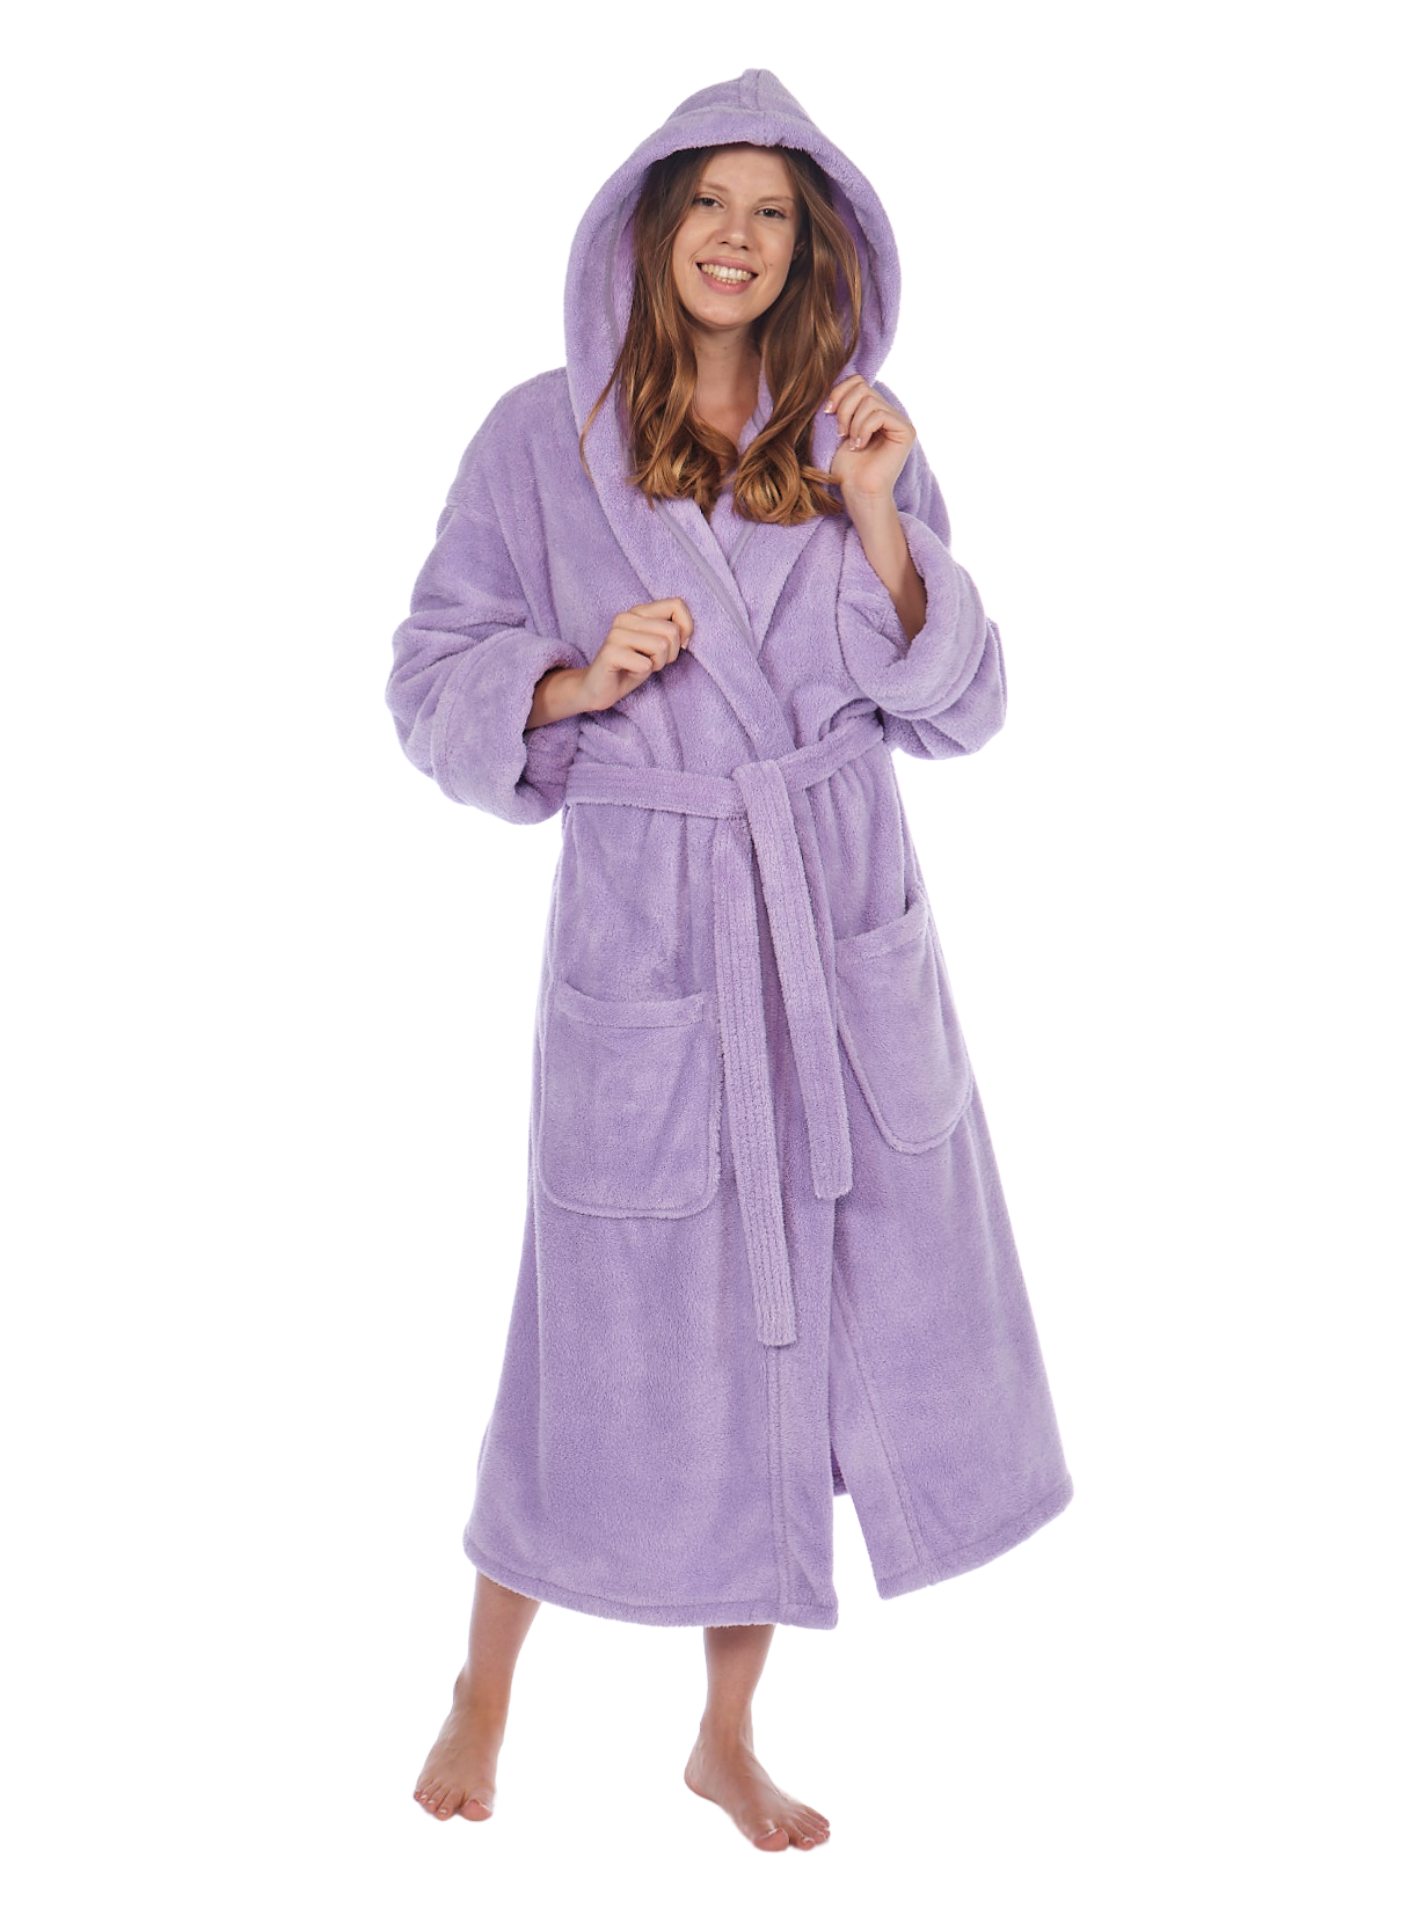 Parador Hooded Terry Kids Bath Robe, 100% Cotton, Made in Turkey - Navy –  1-800Towels.com